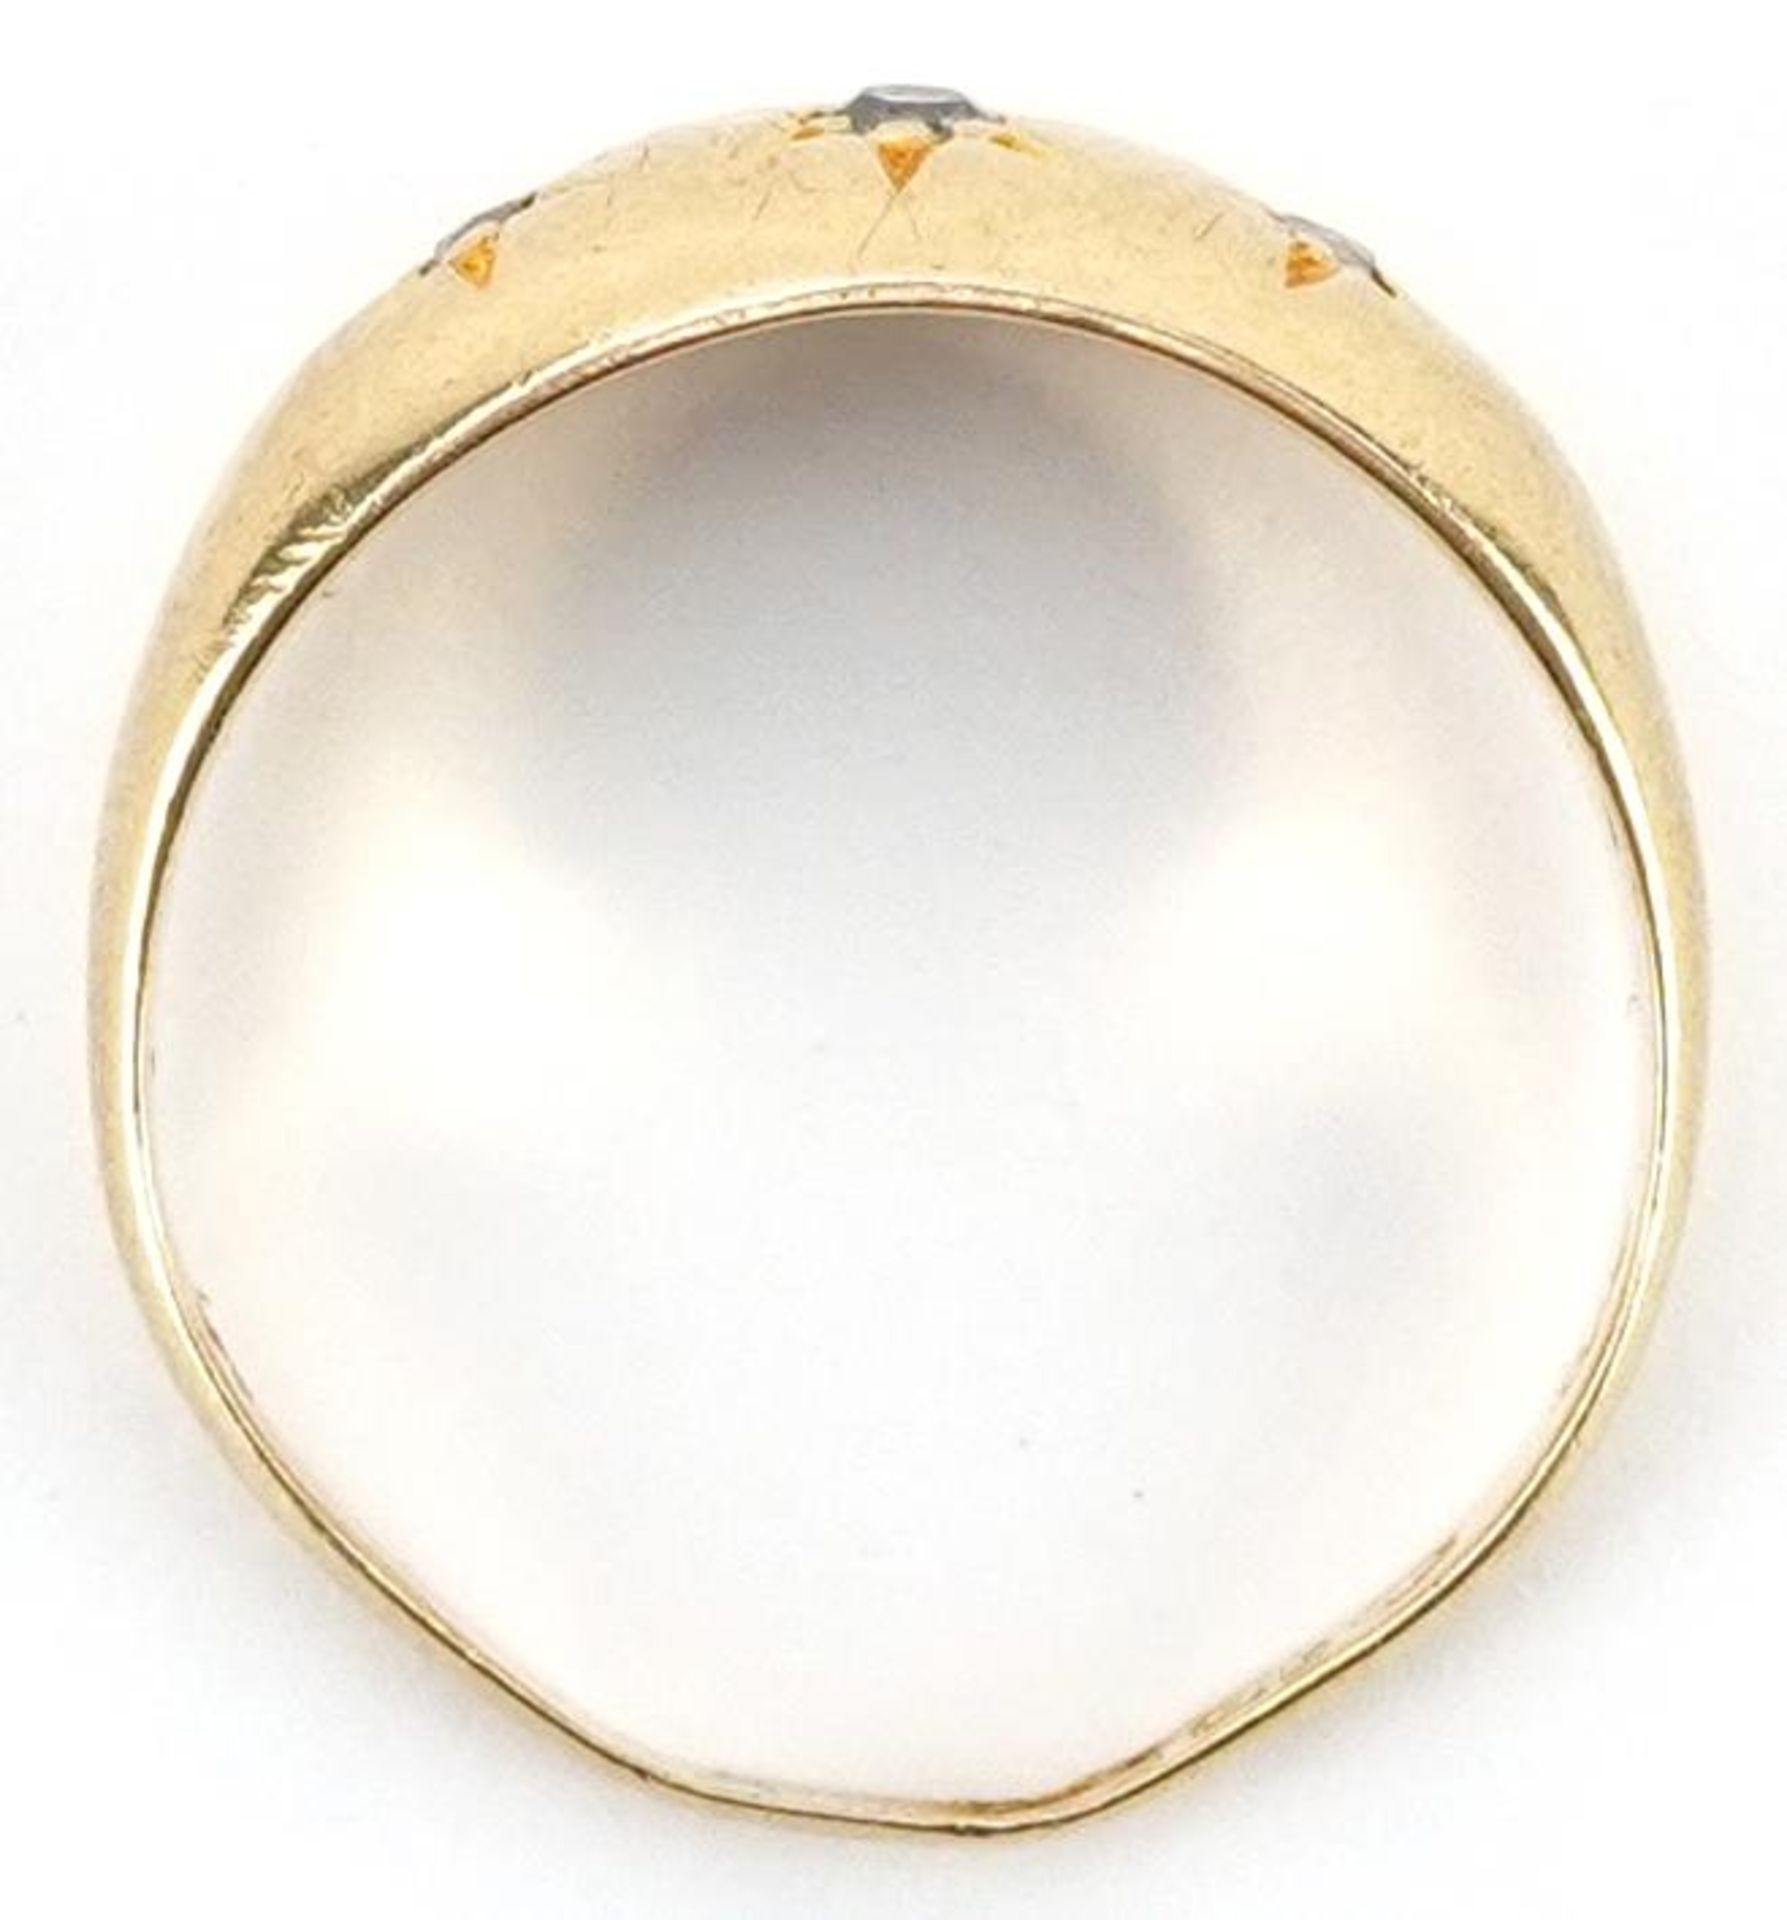 18ct gold diamond three stone Gypsy ring, the largest diamond approximately 2.0mm in diameter, - Image 3 of 5